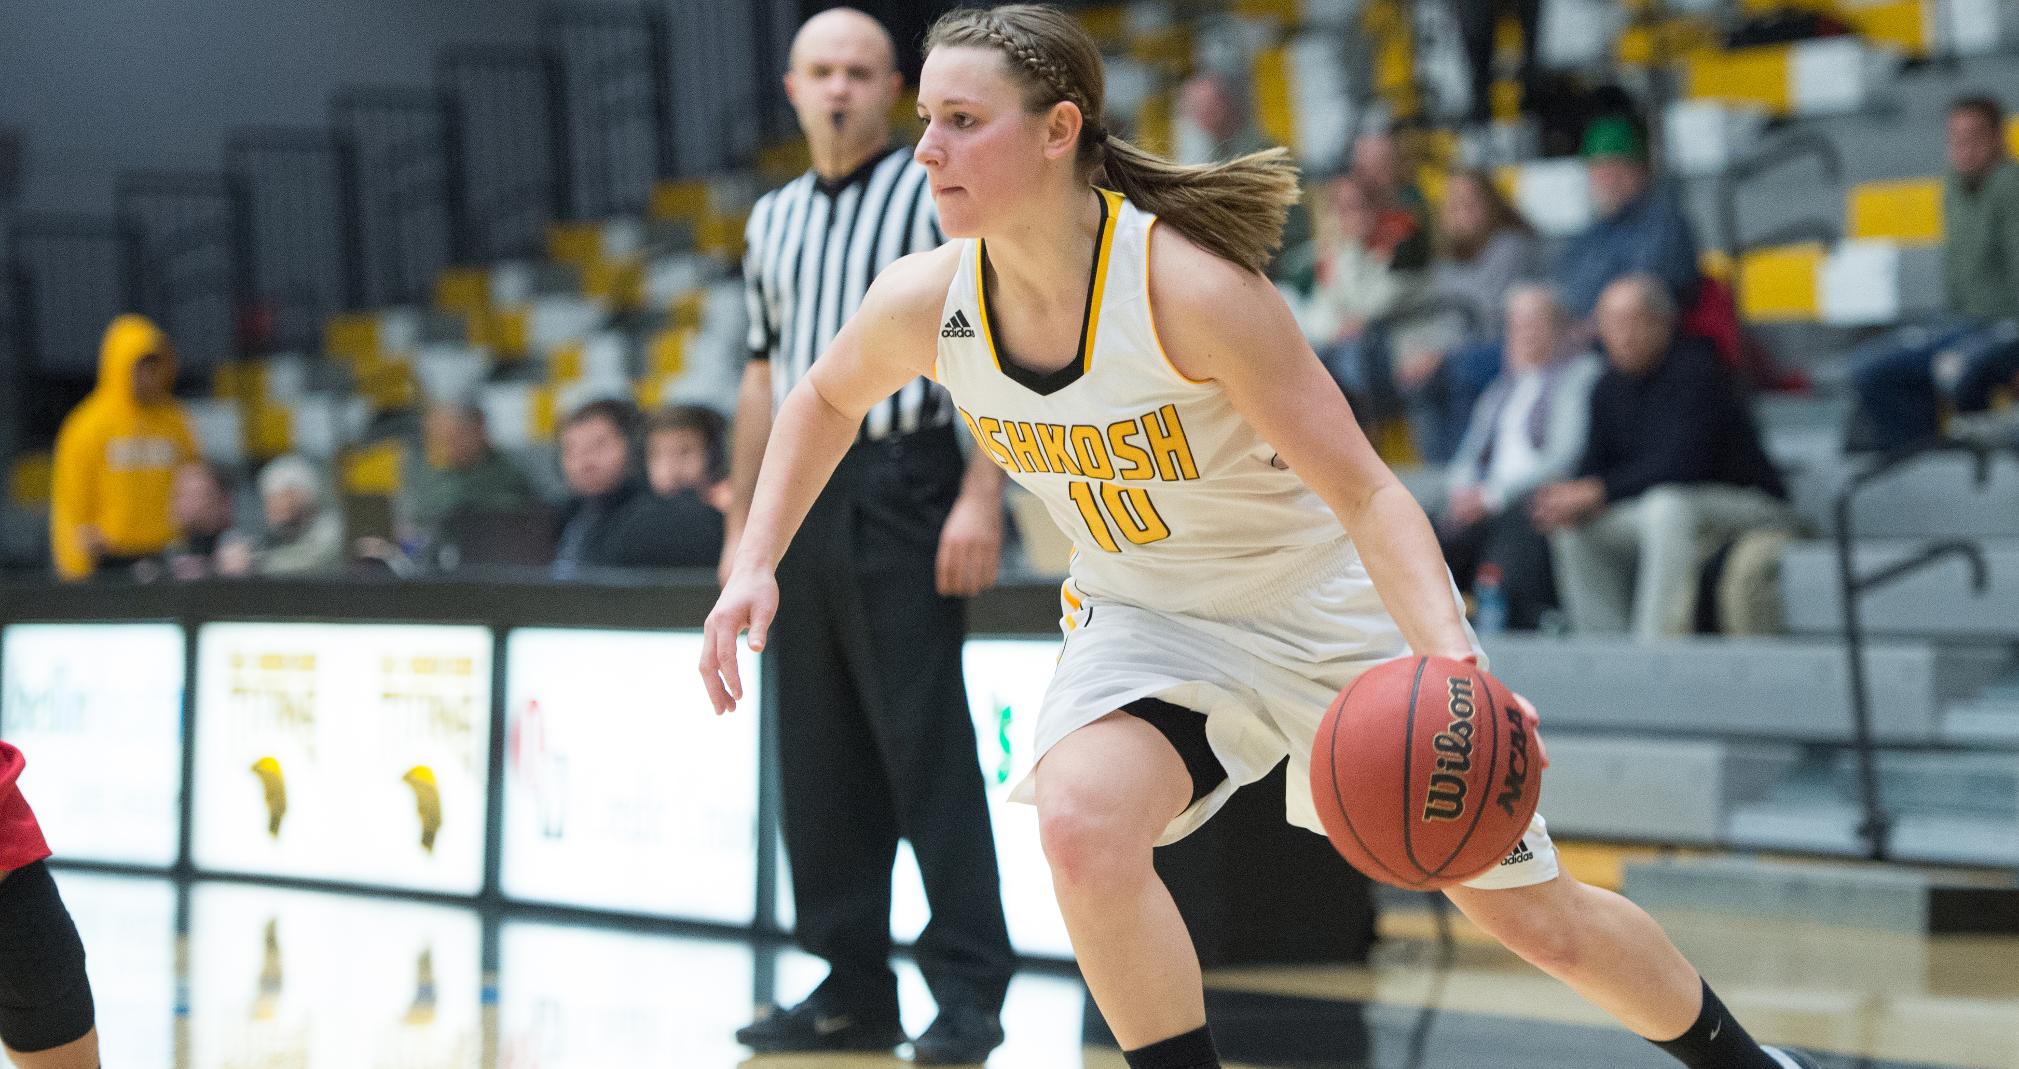 Taylor Schmidt scored 17 points while counting three assists and two steals against the Falcons.